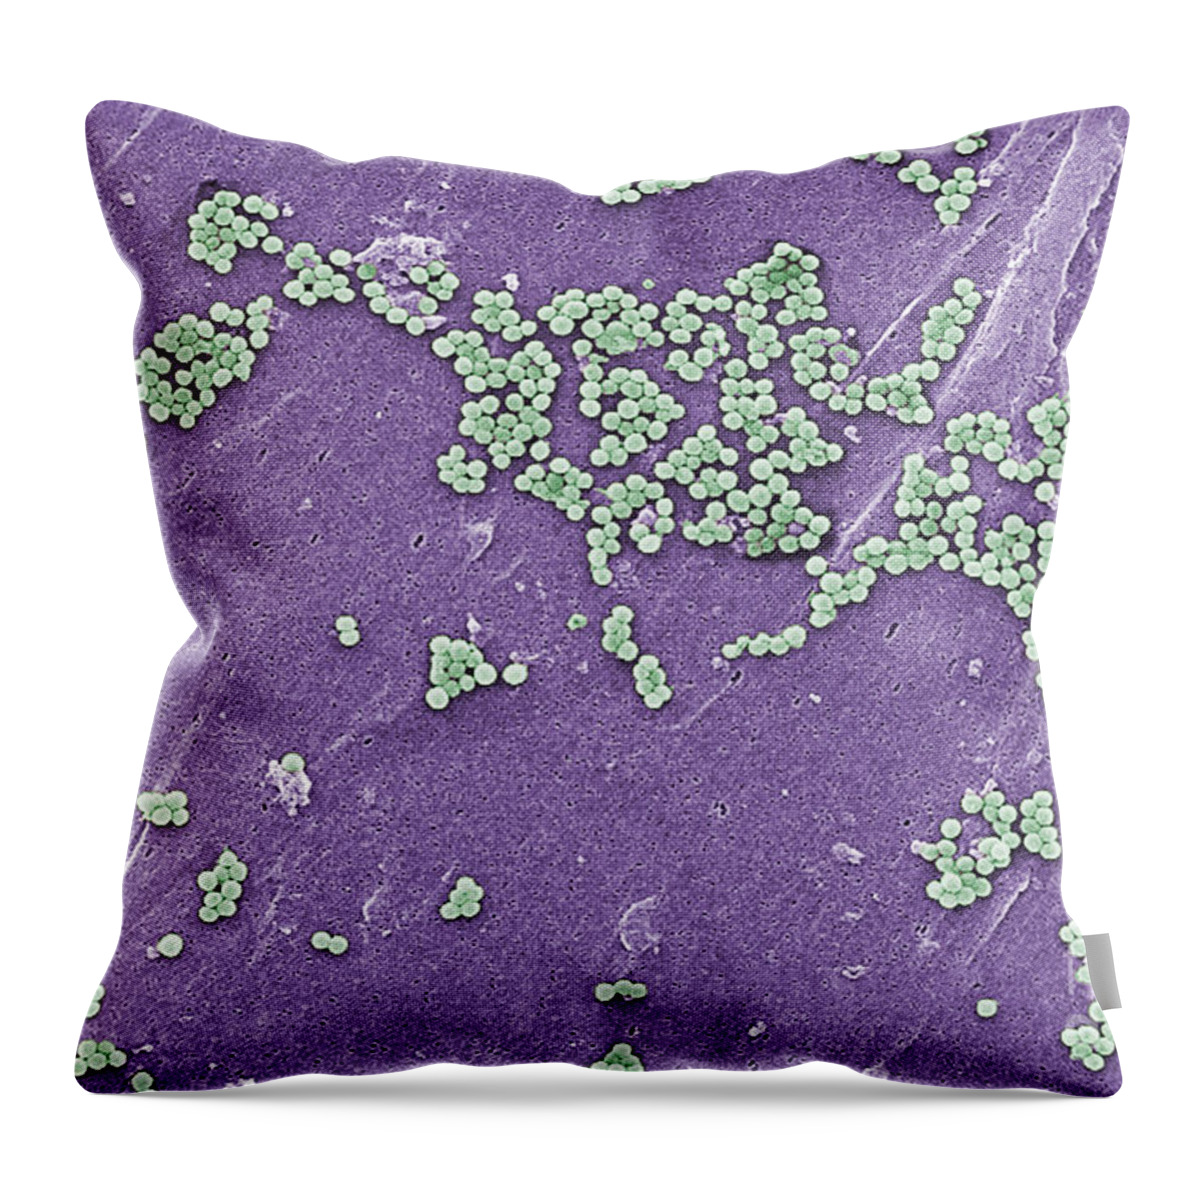 Virulent Throw Pillow featuring the photograph Methicillin-resistant Staphylococcus #9 by Science Source